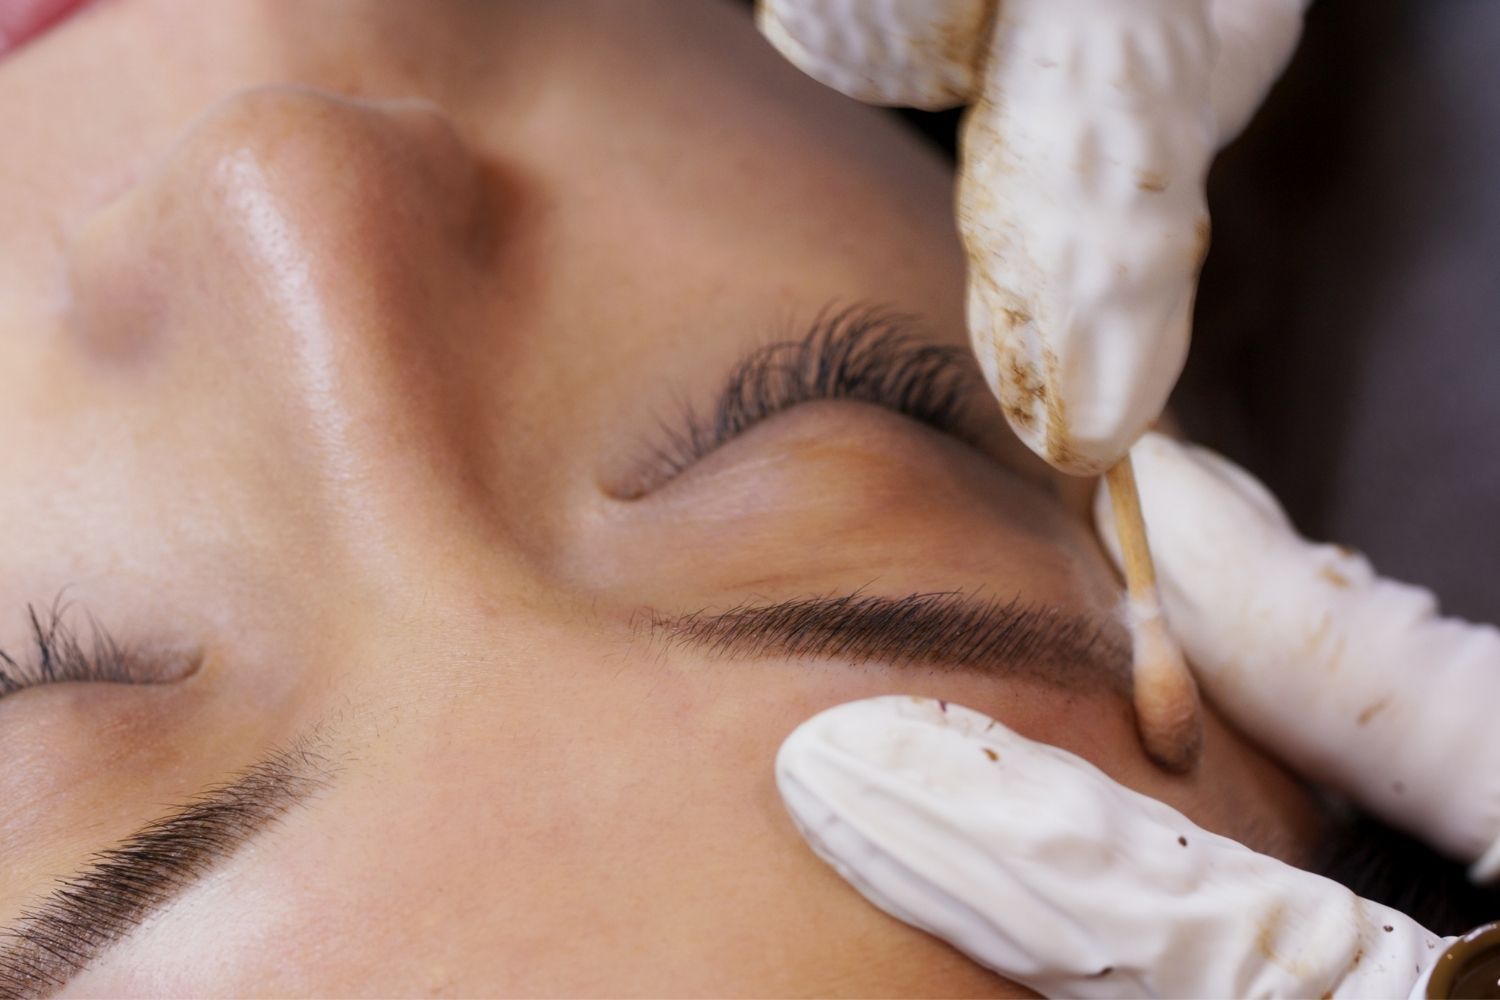 brow lamination being performed on woman's face